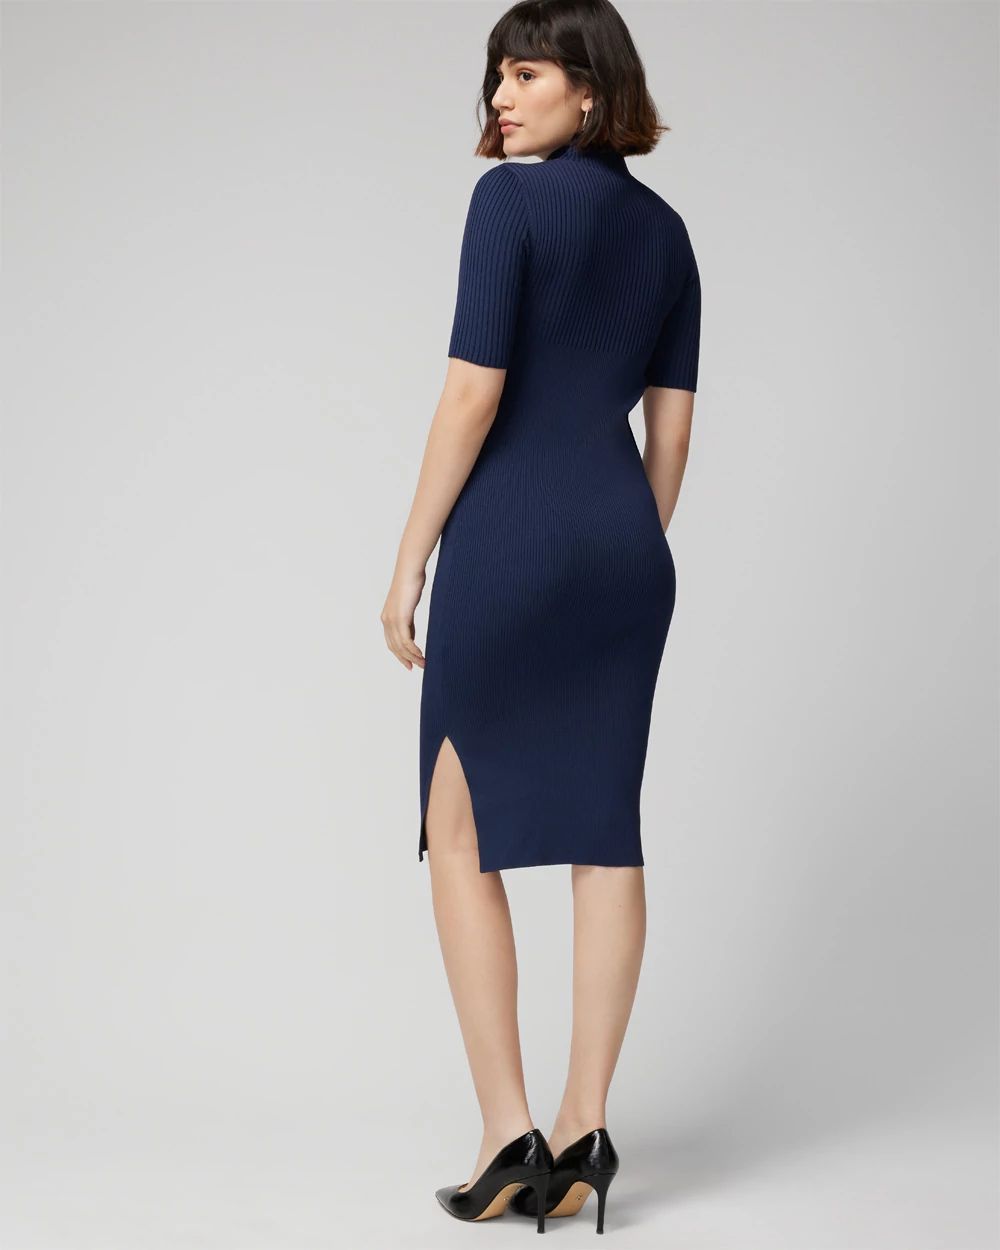 Petite Elbow-Sleeve Cutout Sweater Dress click to view larger image.